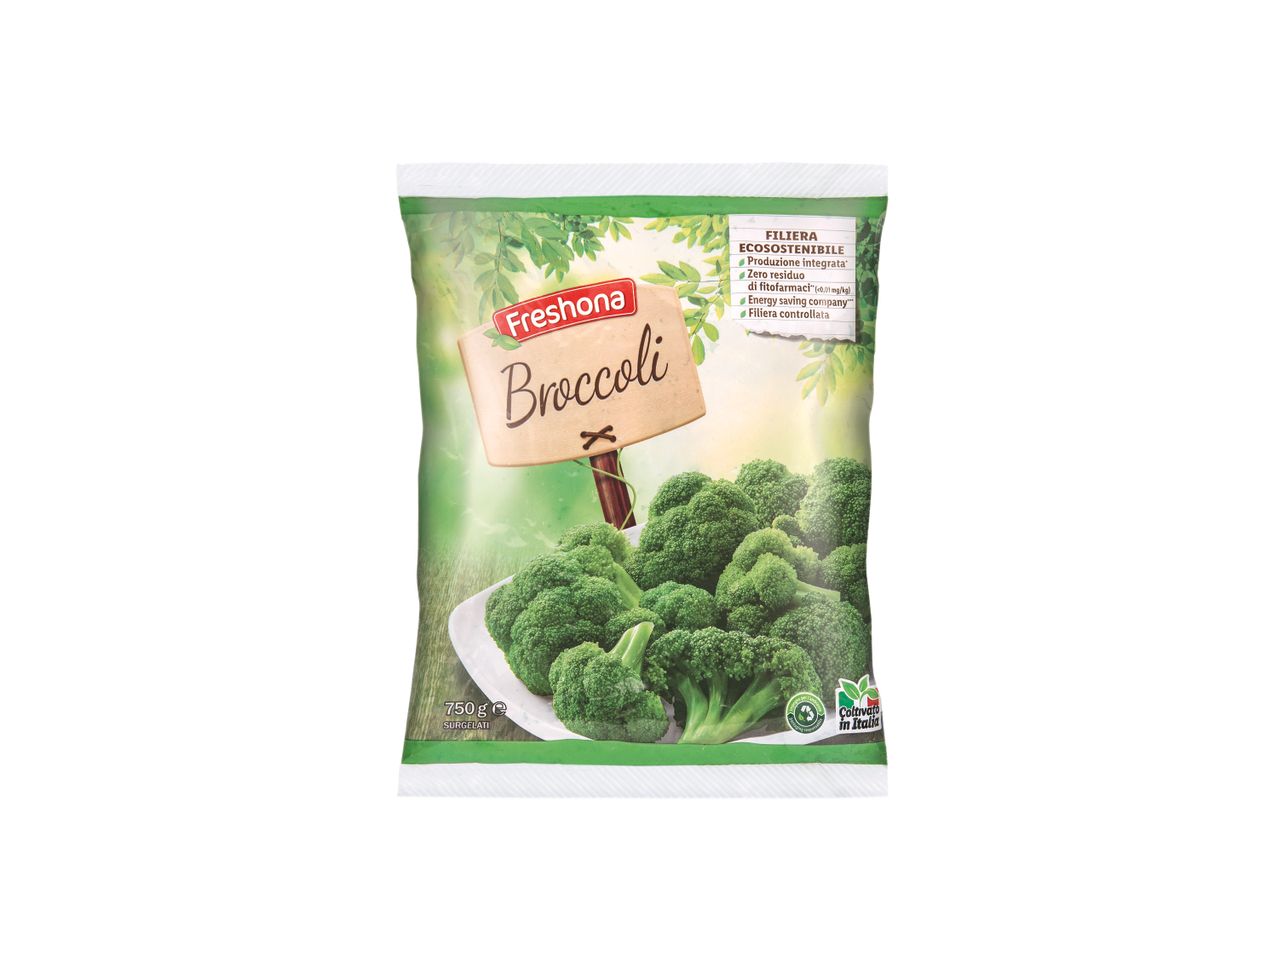 Go to full screen view: Broccoli - Image 1